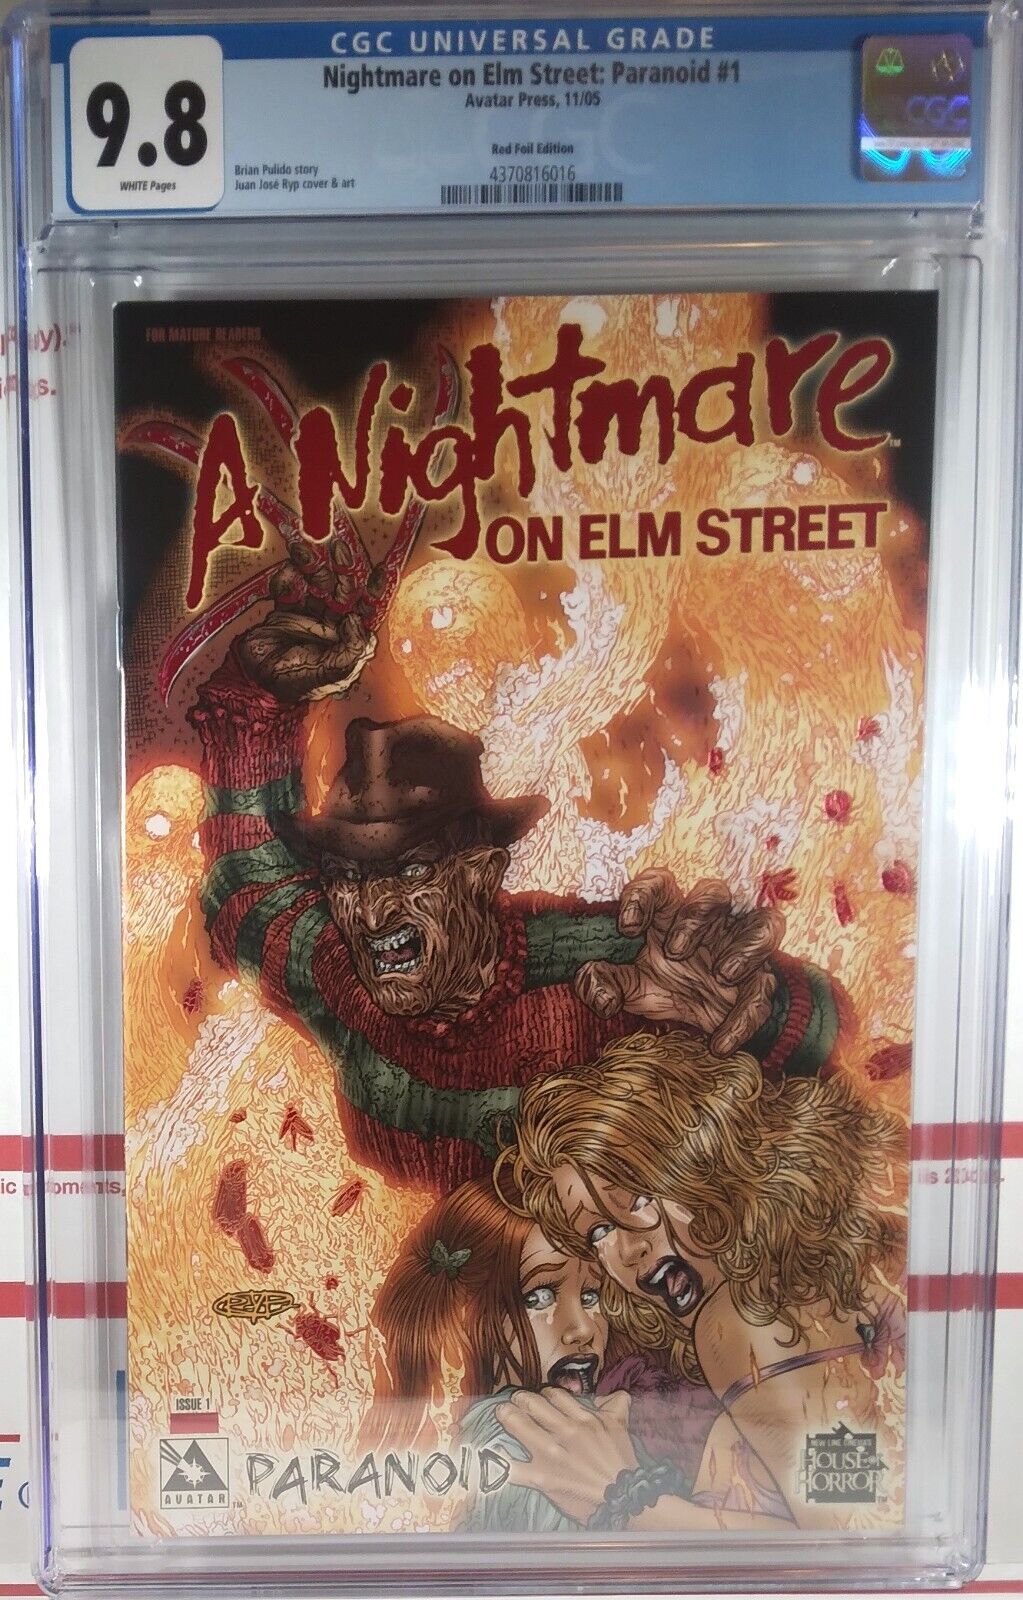 🩸💀 CGC 9.8 NM/MT A NIGHTMARE ON ELM STREET PARANOID #1 RED FOIL VARIANT 2005